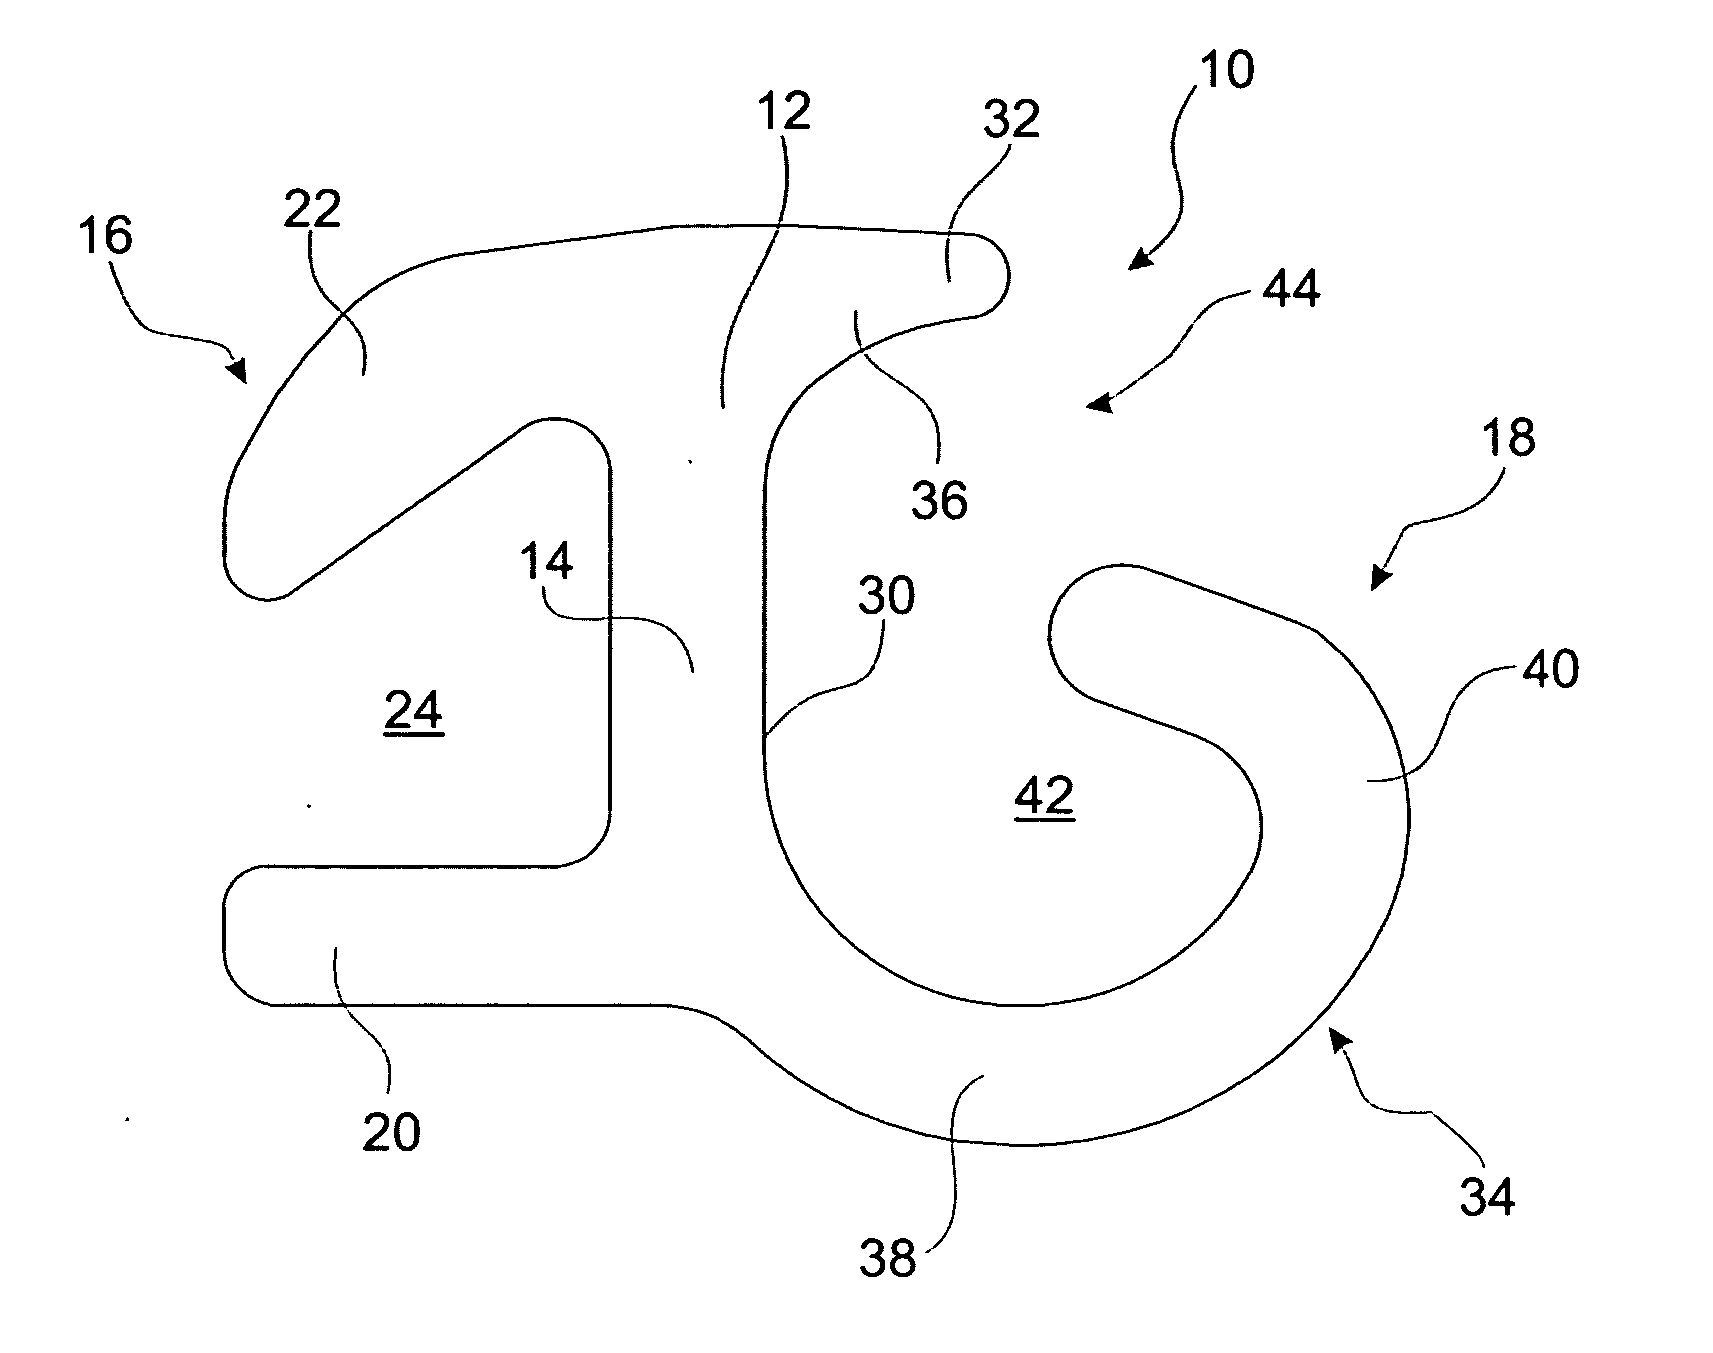 Connecting Profiled Element for Connecting Sheet Piles to Carrier Elements, and Combined Sheets Piling Comprising one Such Connecting Profiled Element